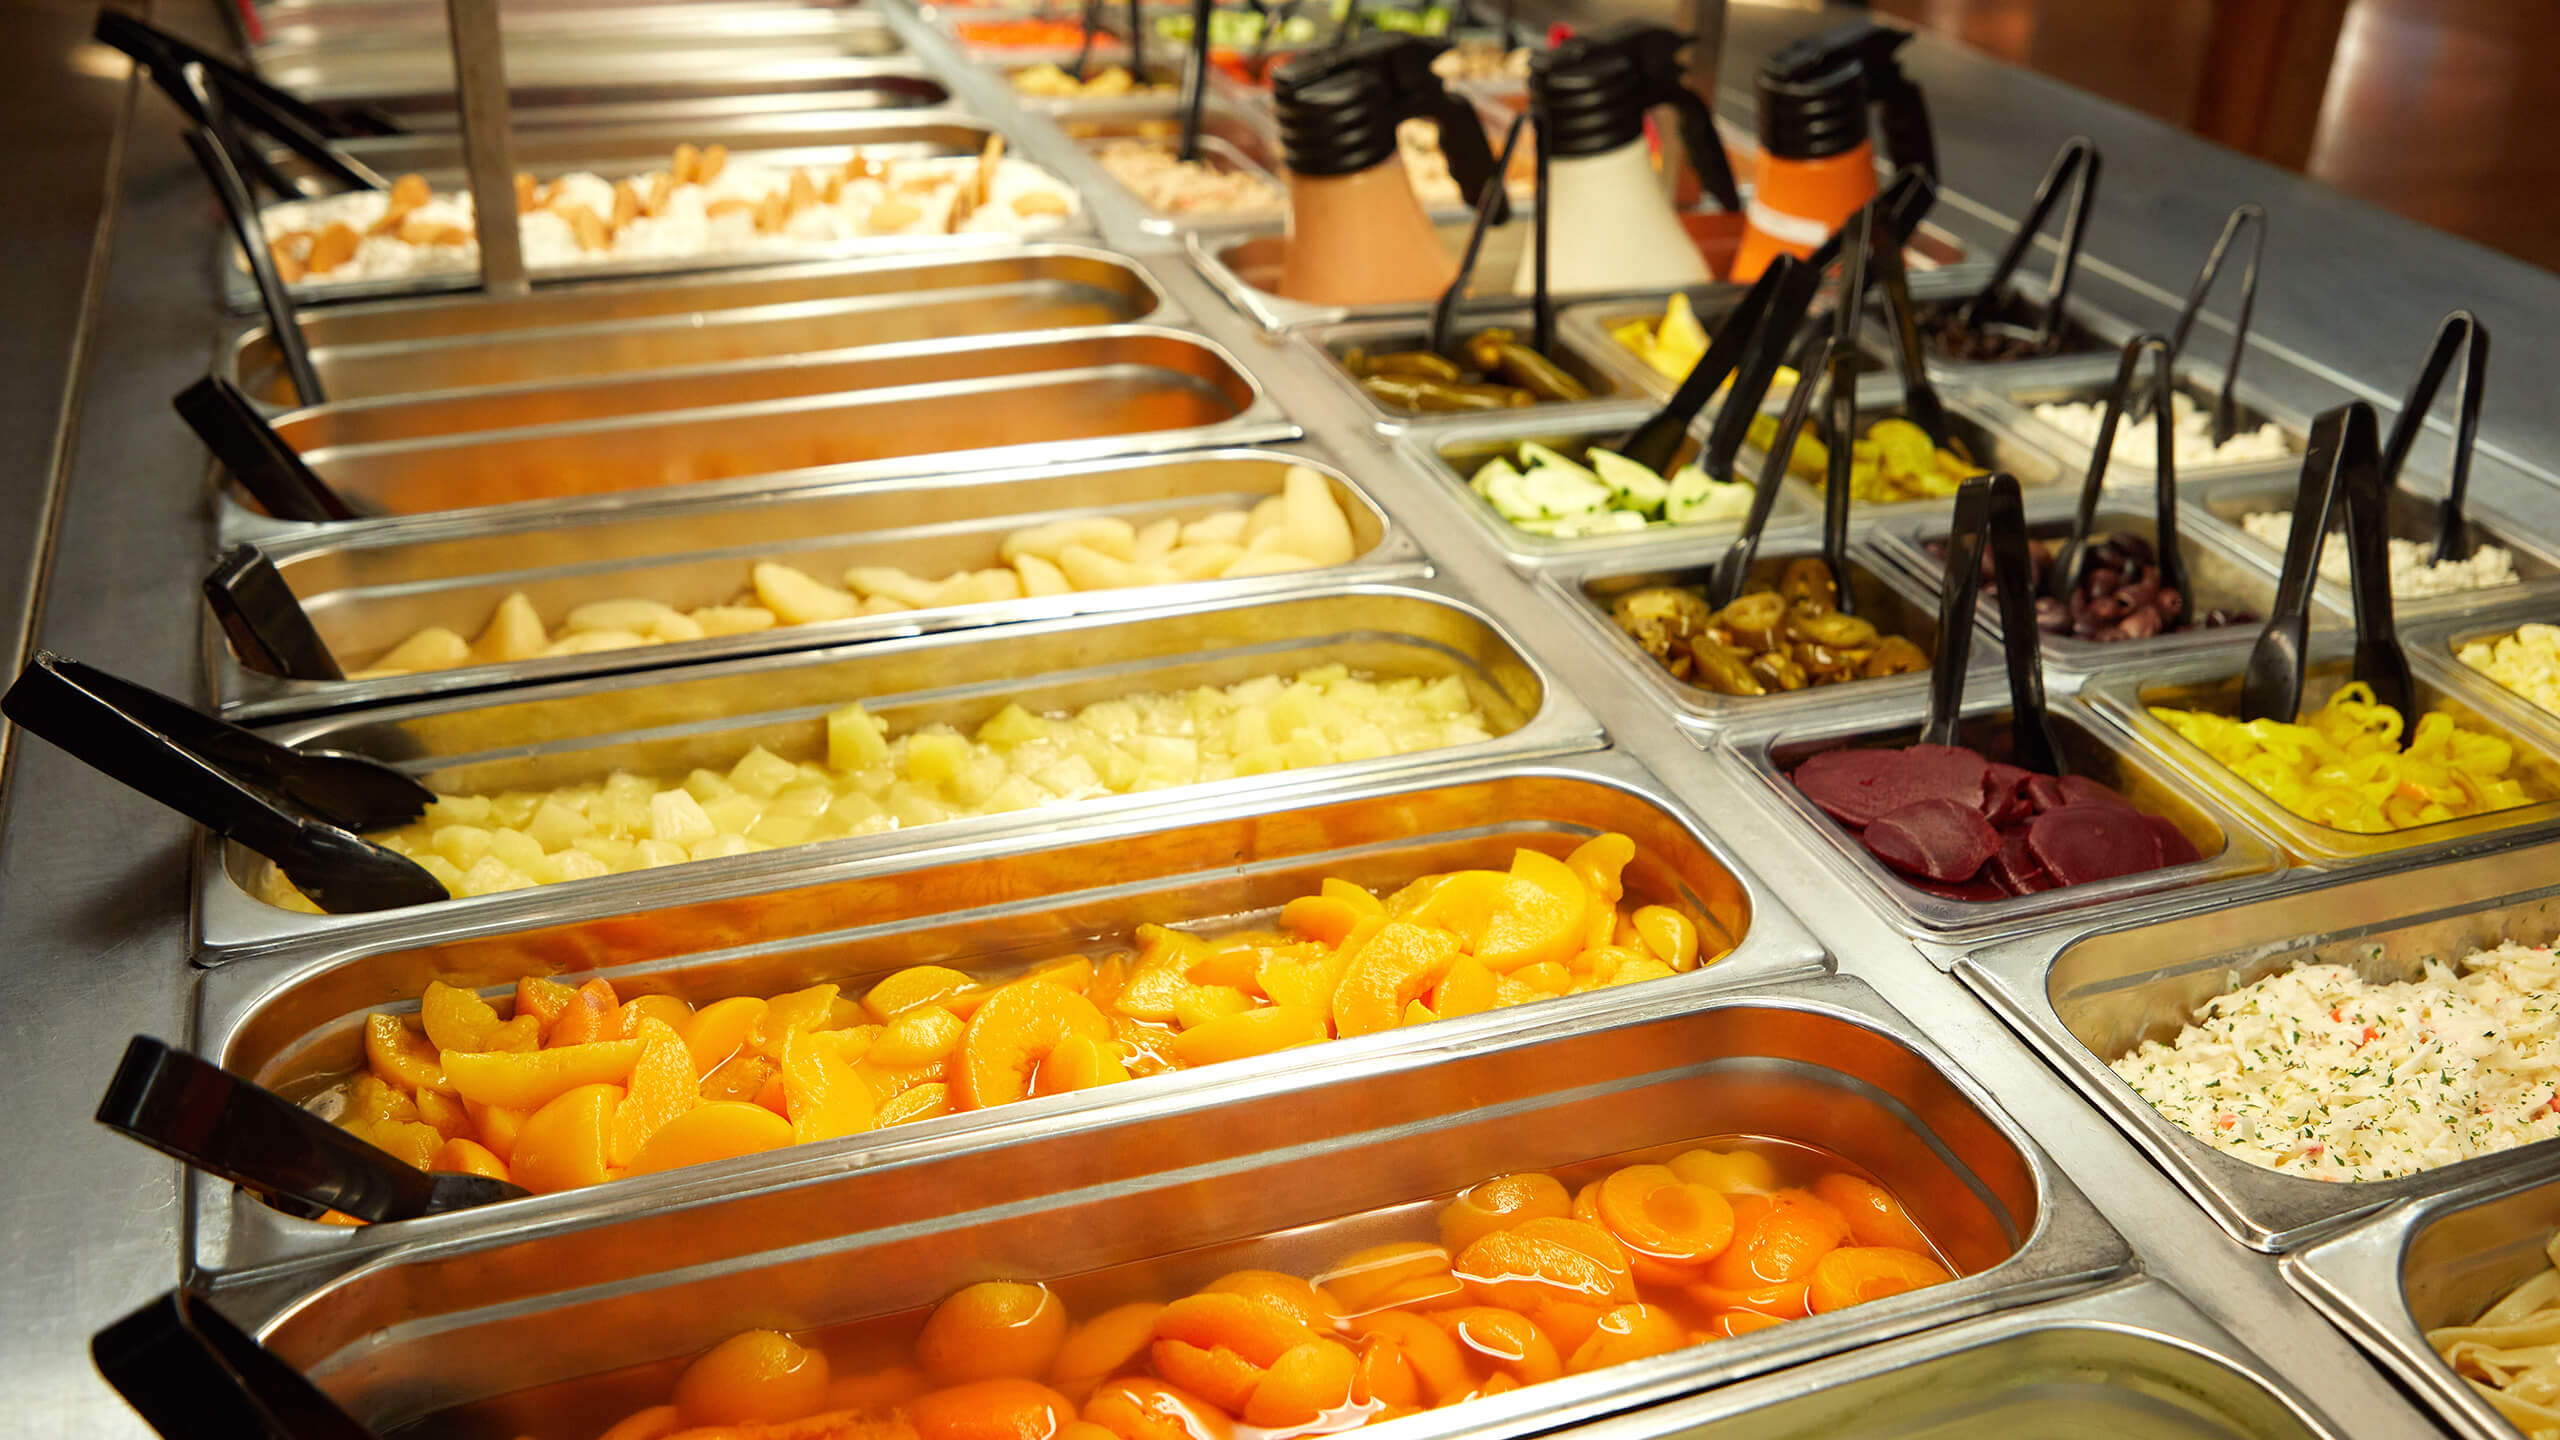 Fresh fruits and veggies, and a wicked-good salad bar.